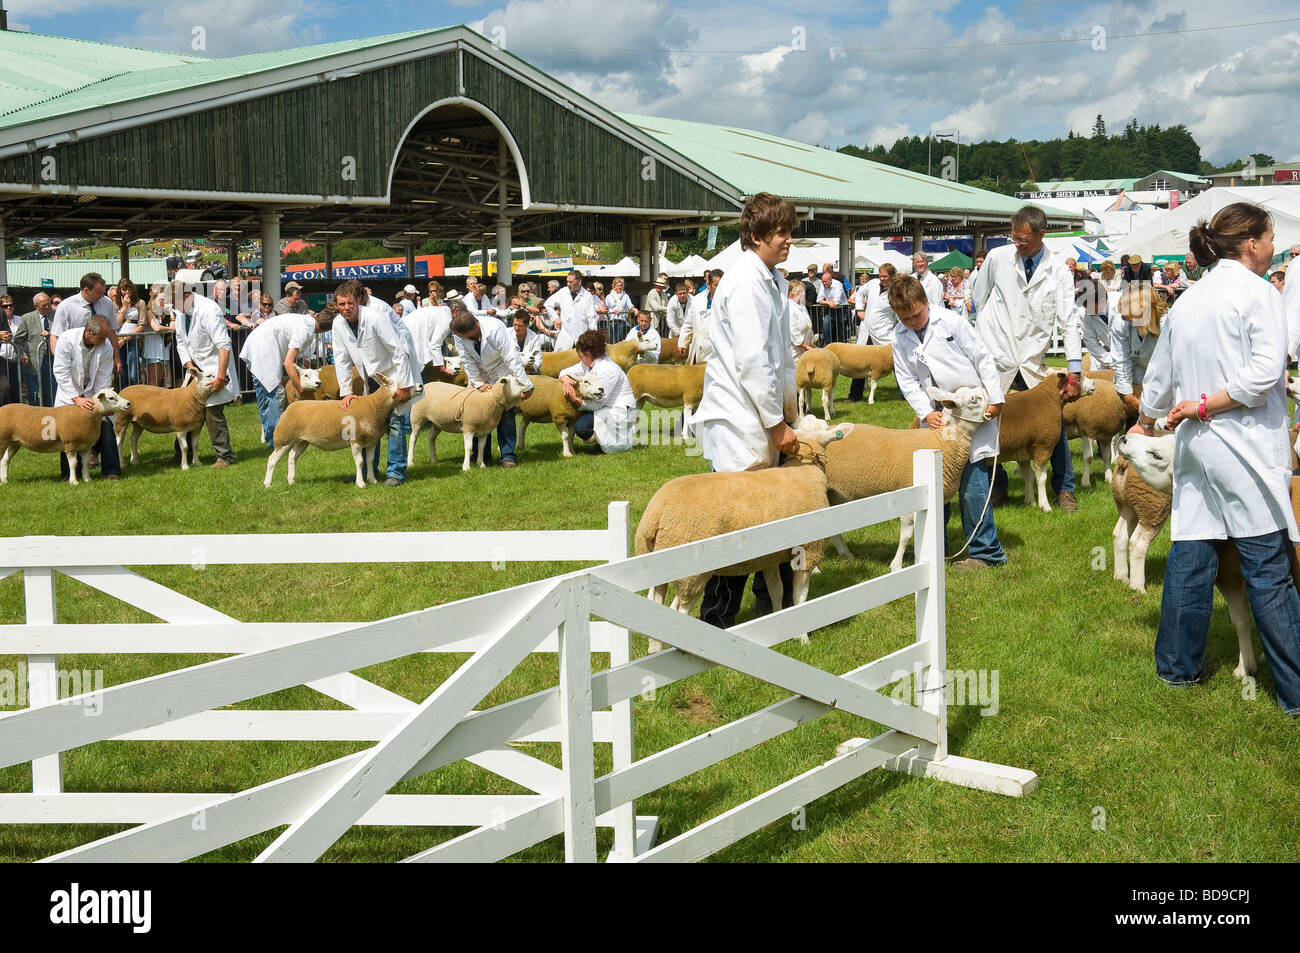 Texel sheep being judged at the Great Yorkshire Show Harrogate North Yorkshire England UK United Kingdom GB Great Britain Stock Photo